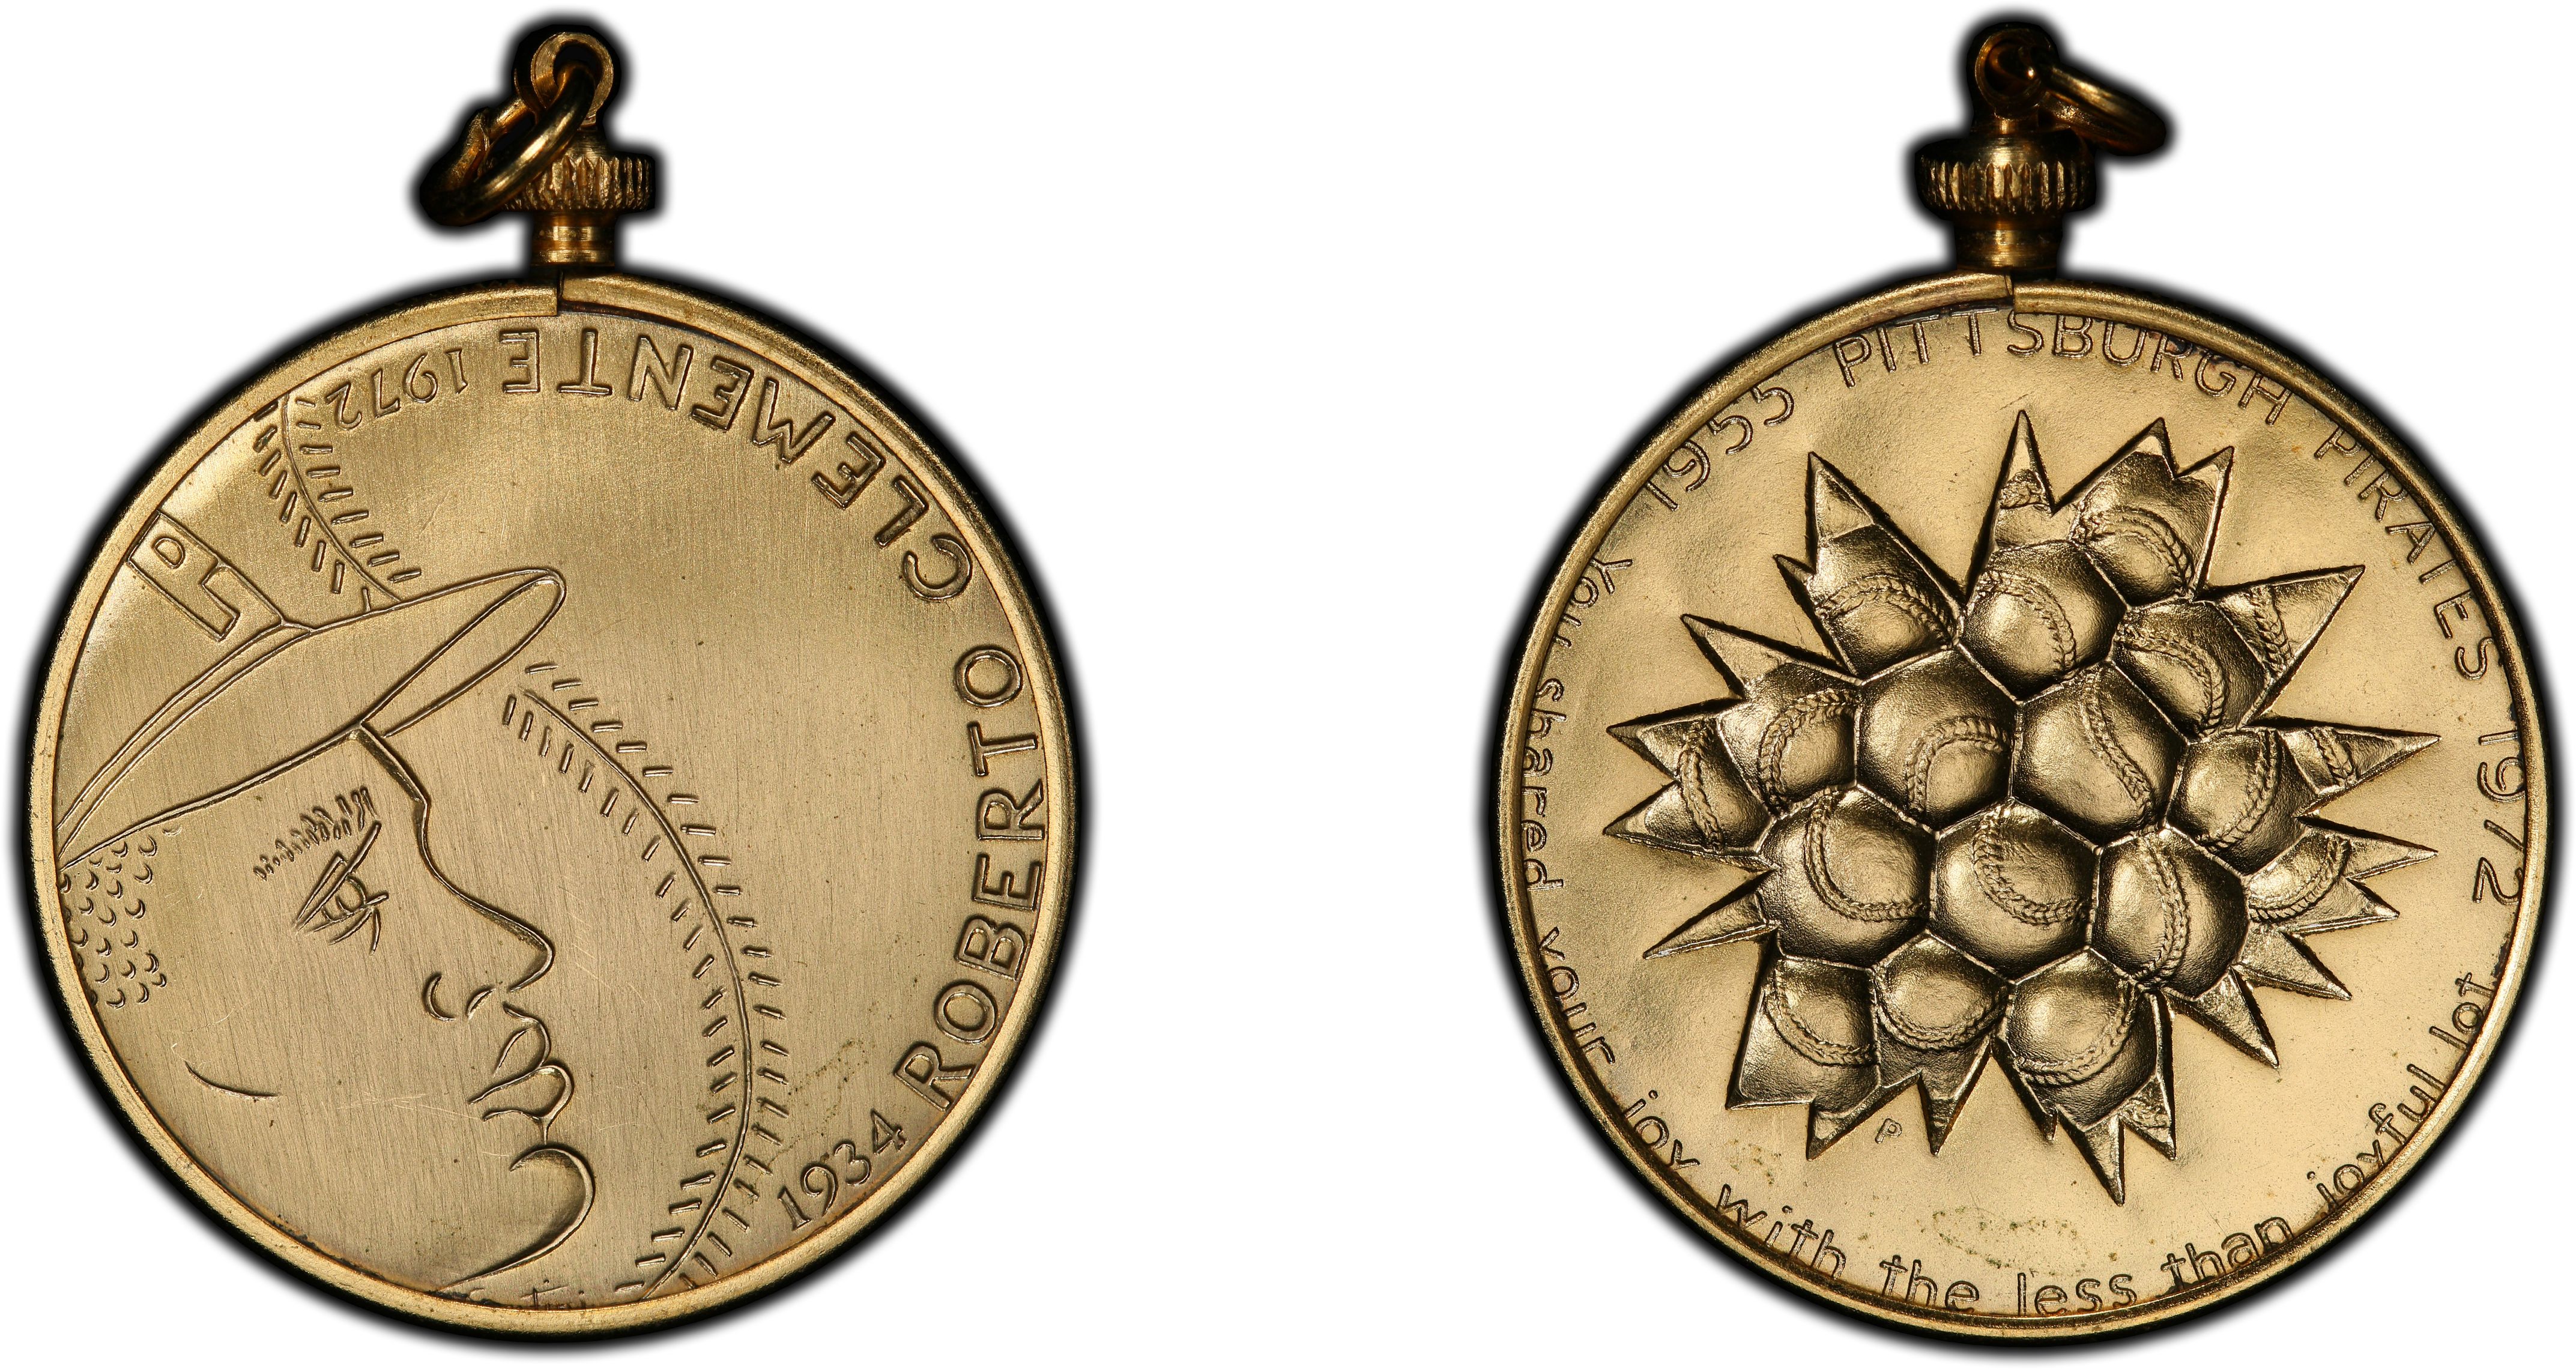 Pittsburgh Pirates Hall of Fame Commemorative Coin Collection